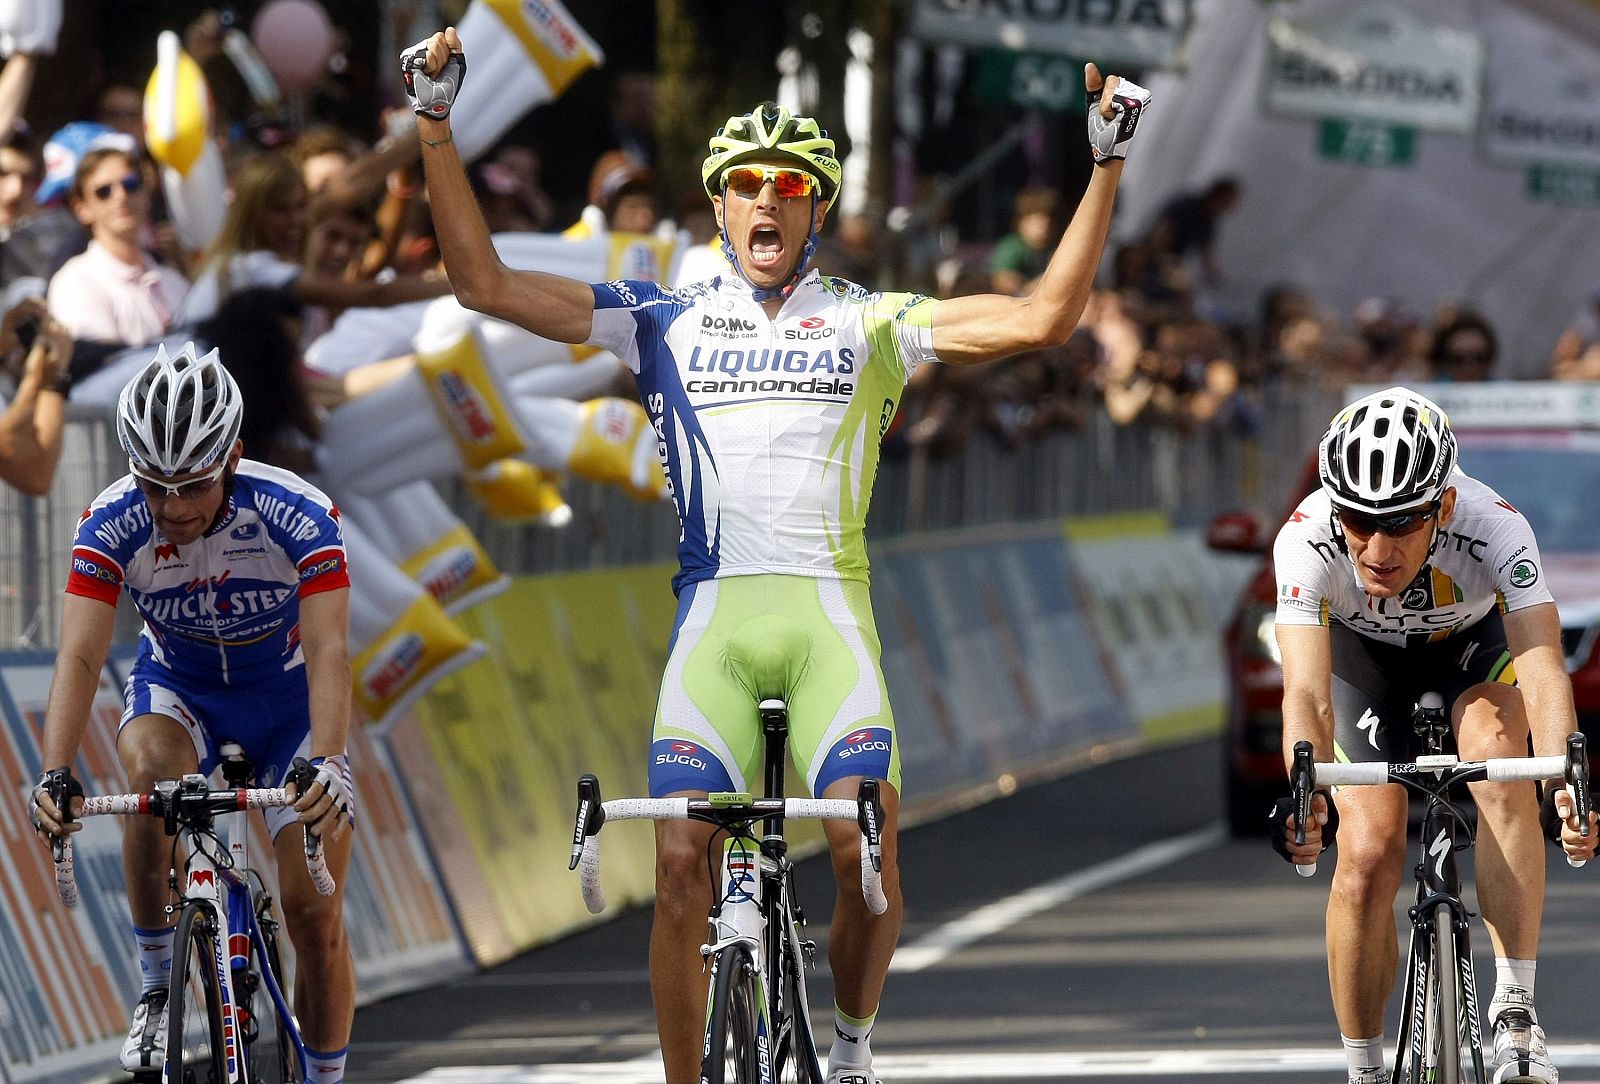 Liquigas rider Capecchi celebrates as he wins the 18th stage of the Giro d'Italia cycling race from Morbegno to San Pellegrino Terme